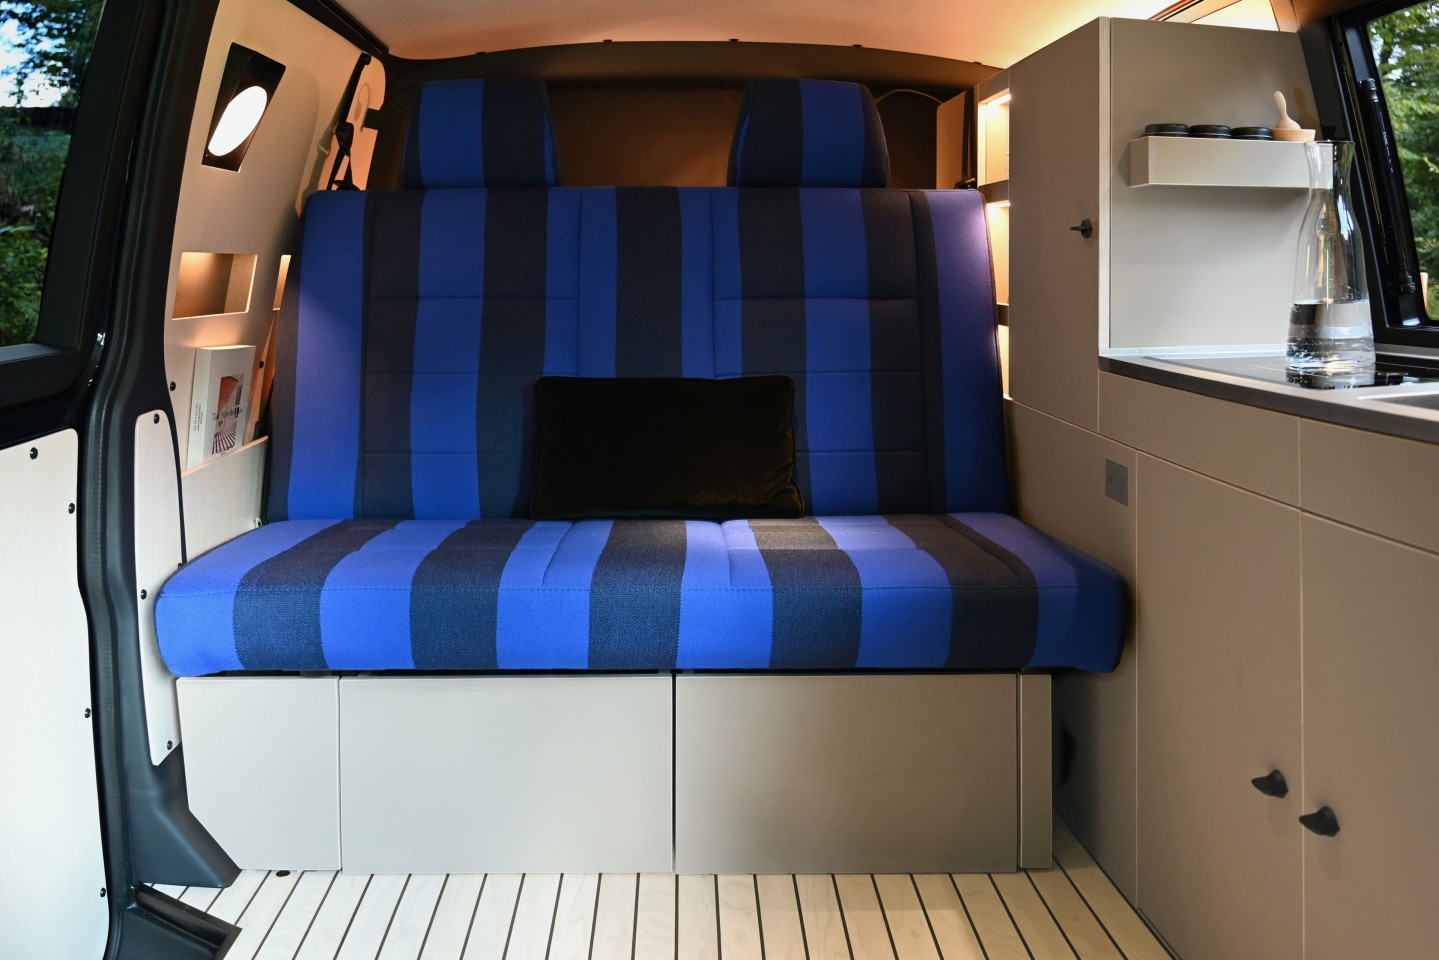 The sleeping bench features an iconic stripe design by Raf Simons, offering a nautical feel to the camper